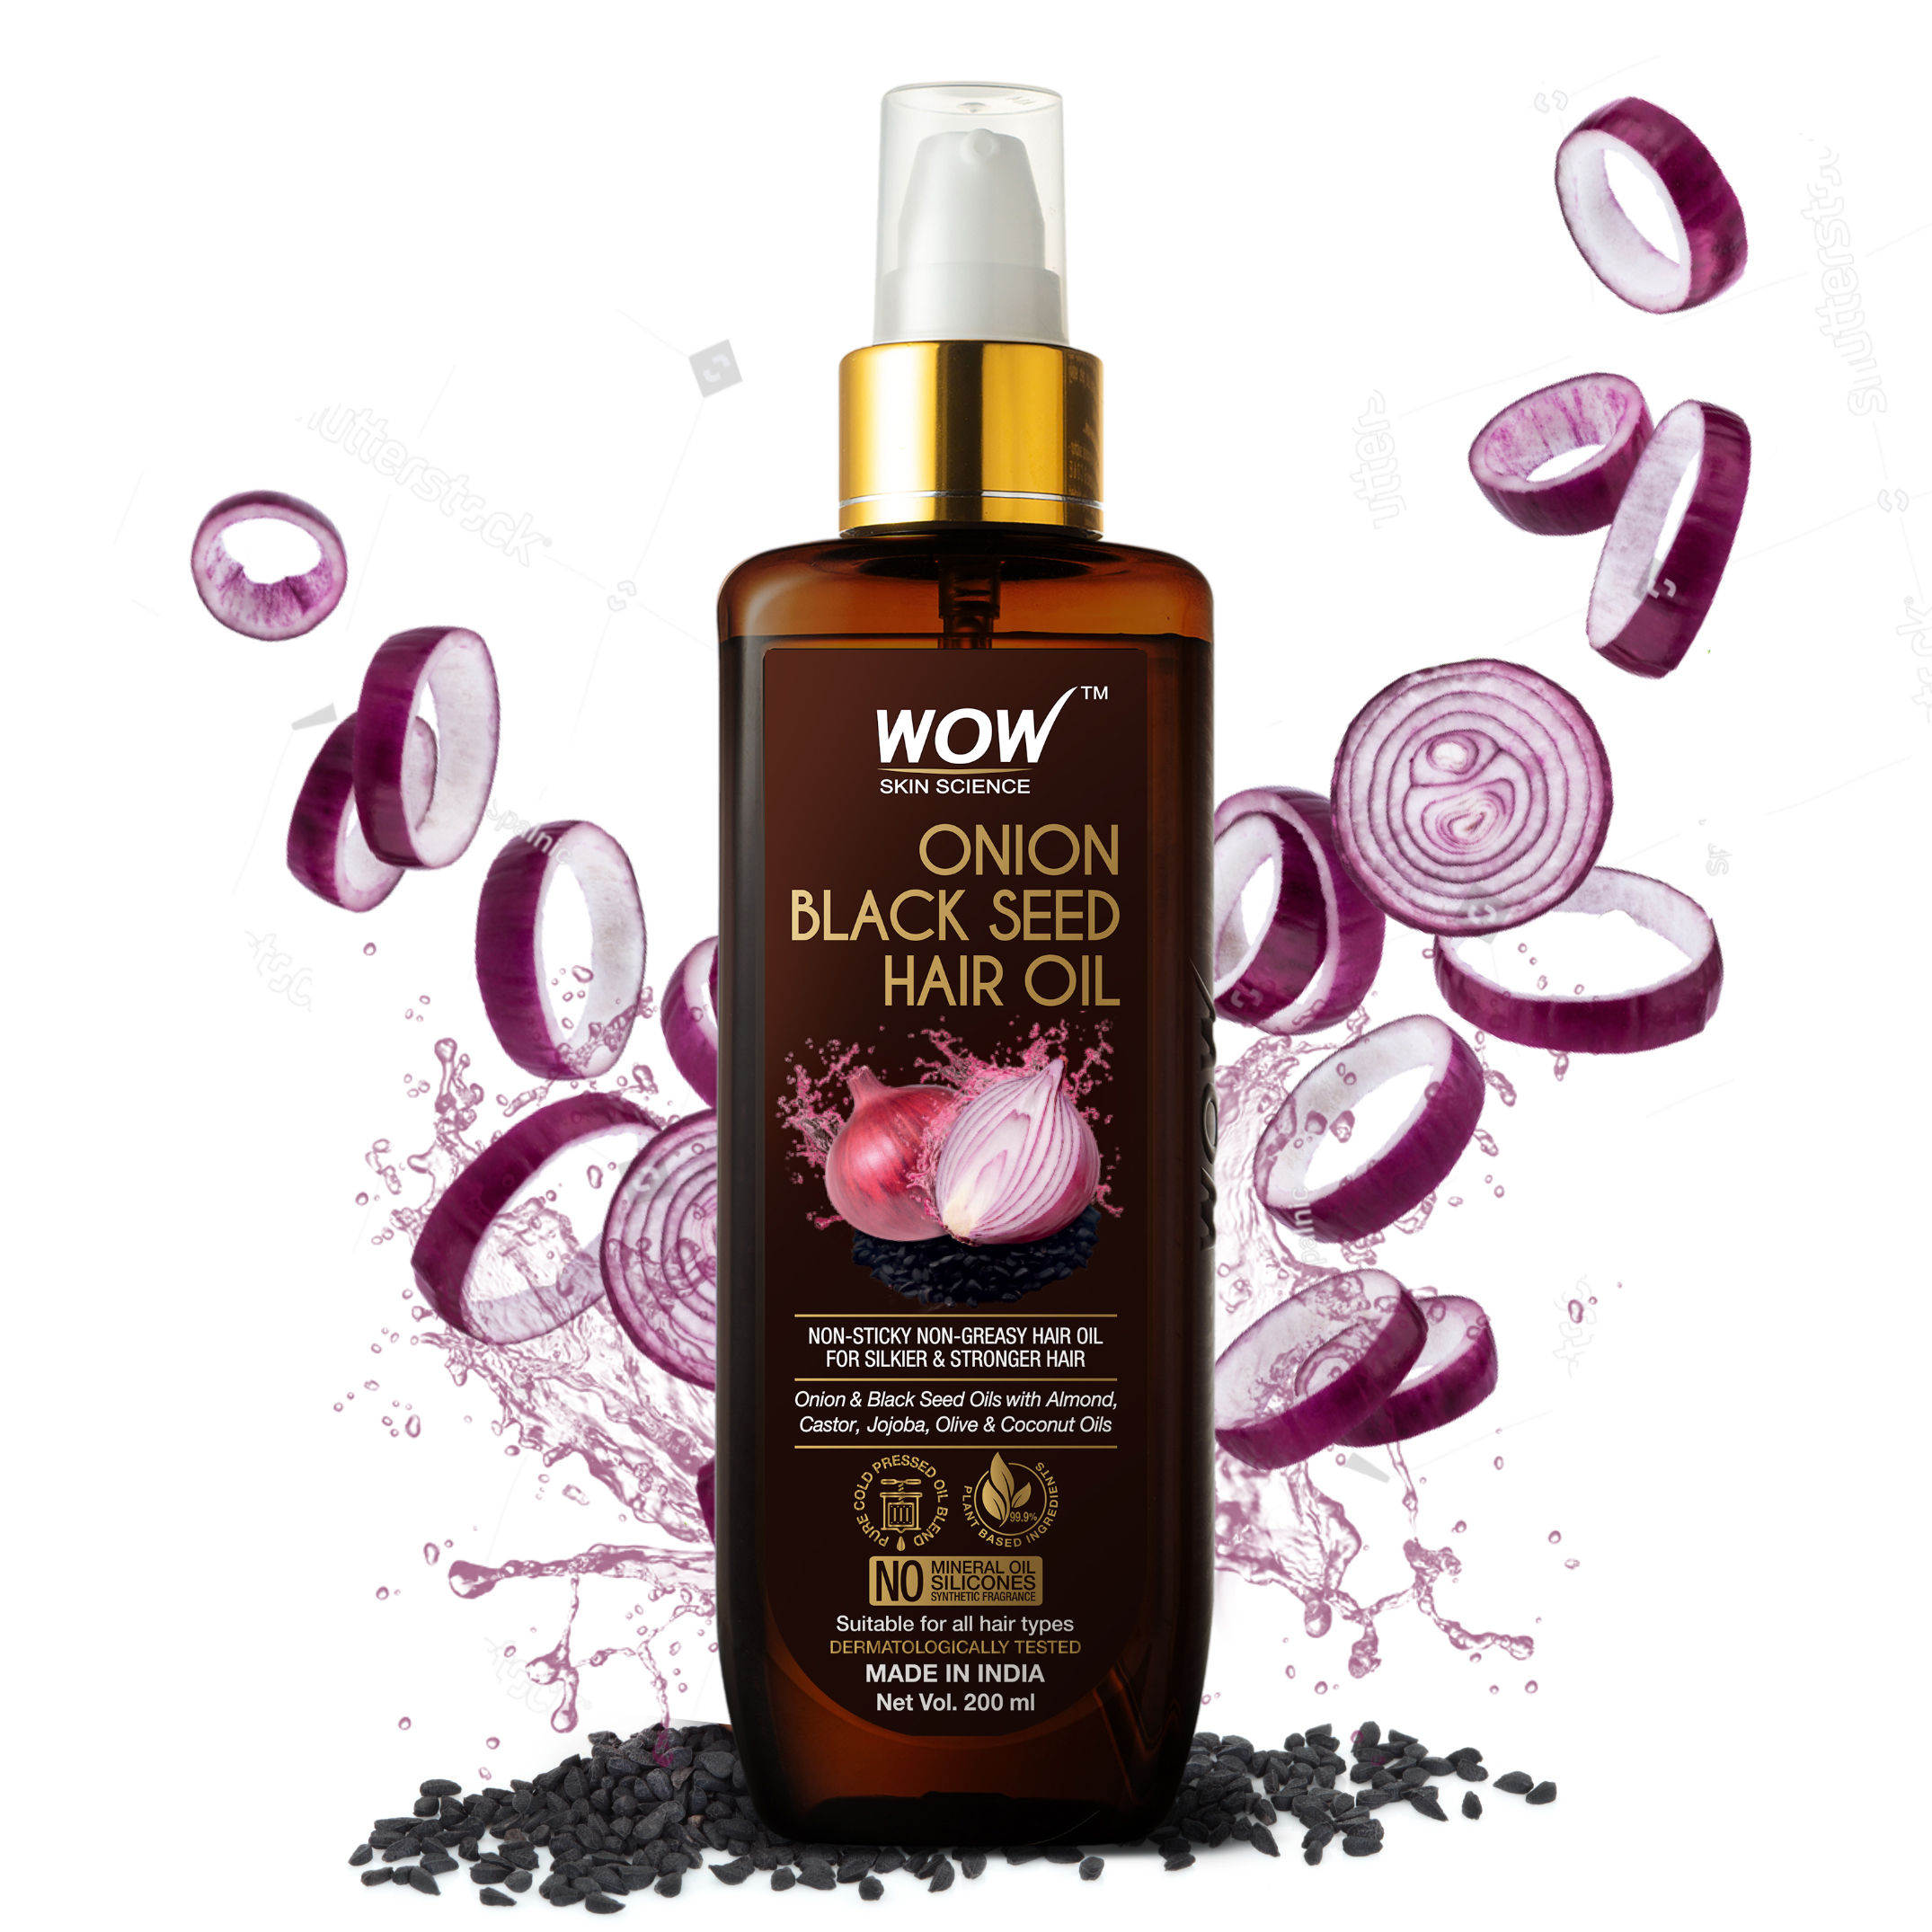 WOW Skin Science Onion Hair Oil With Black Seed Oil Extracts - Controls Hair Fall